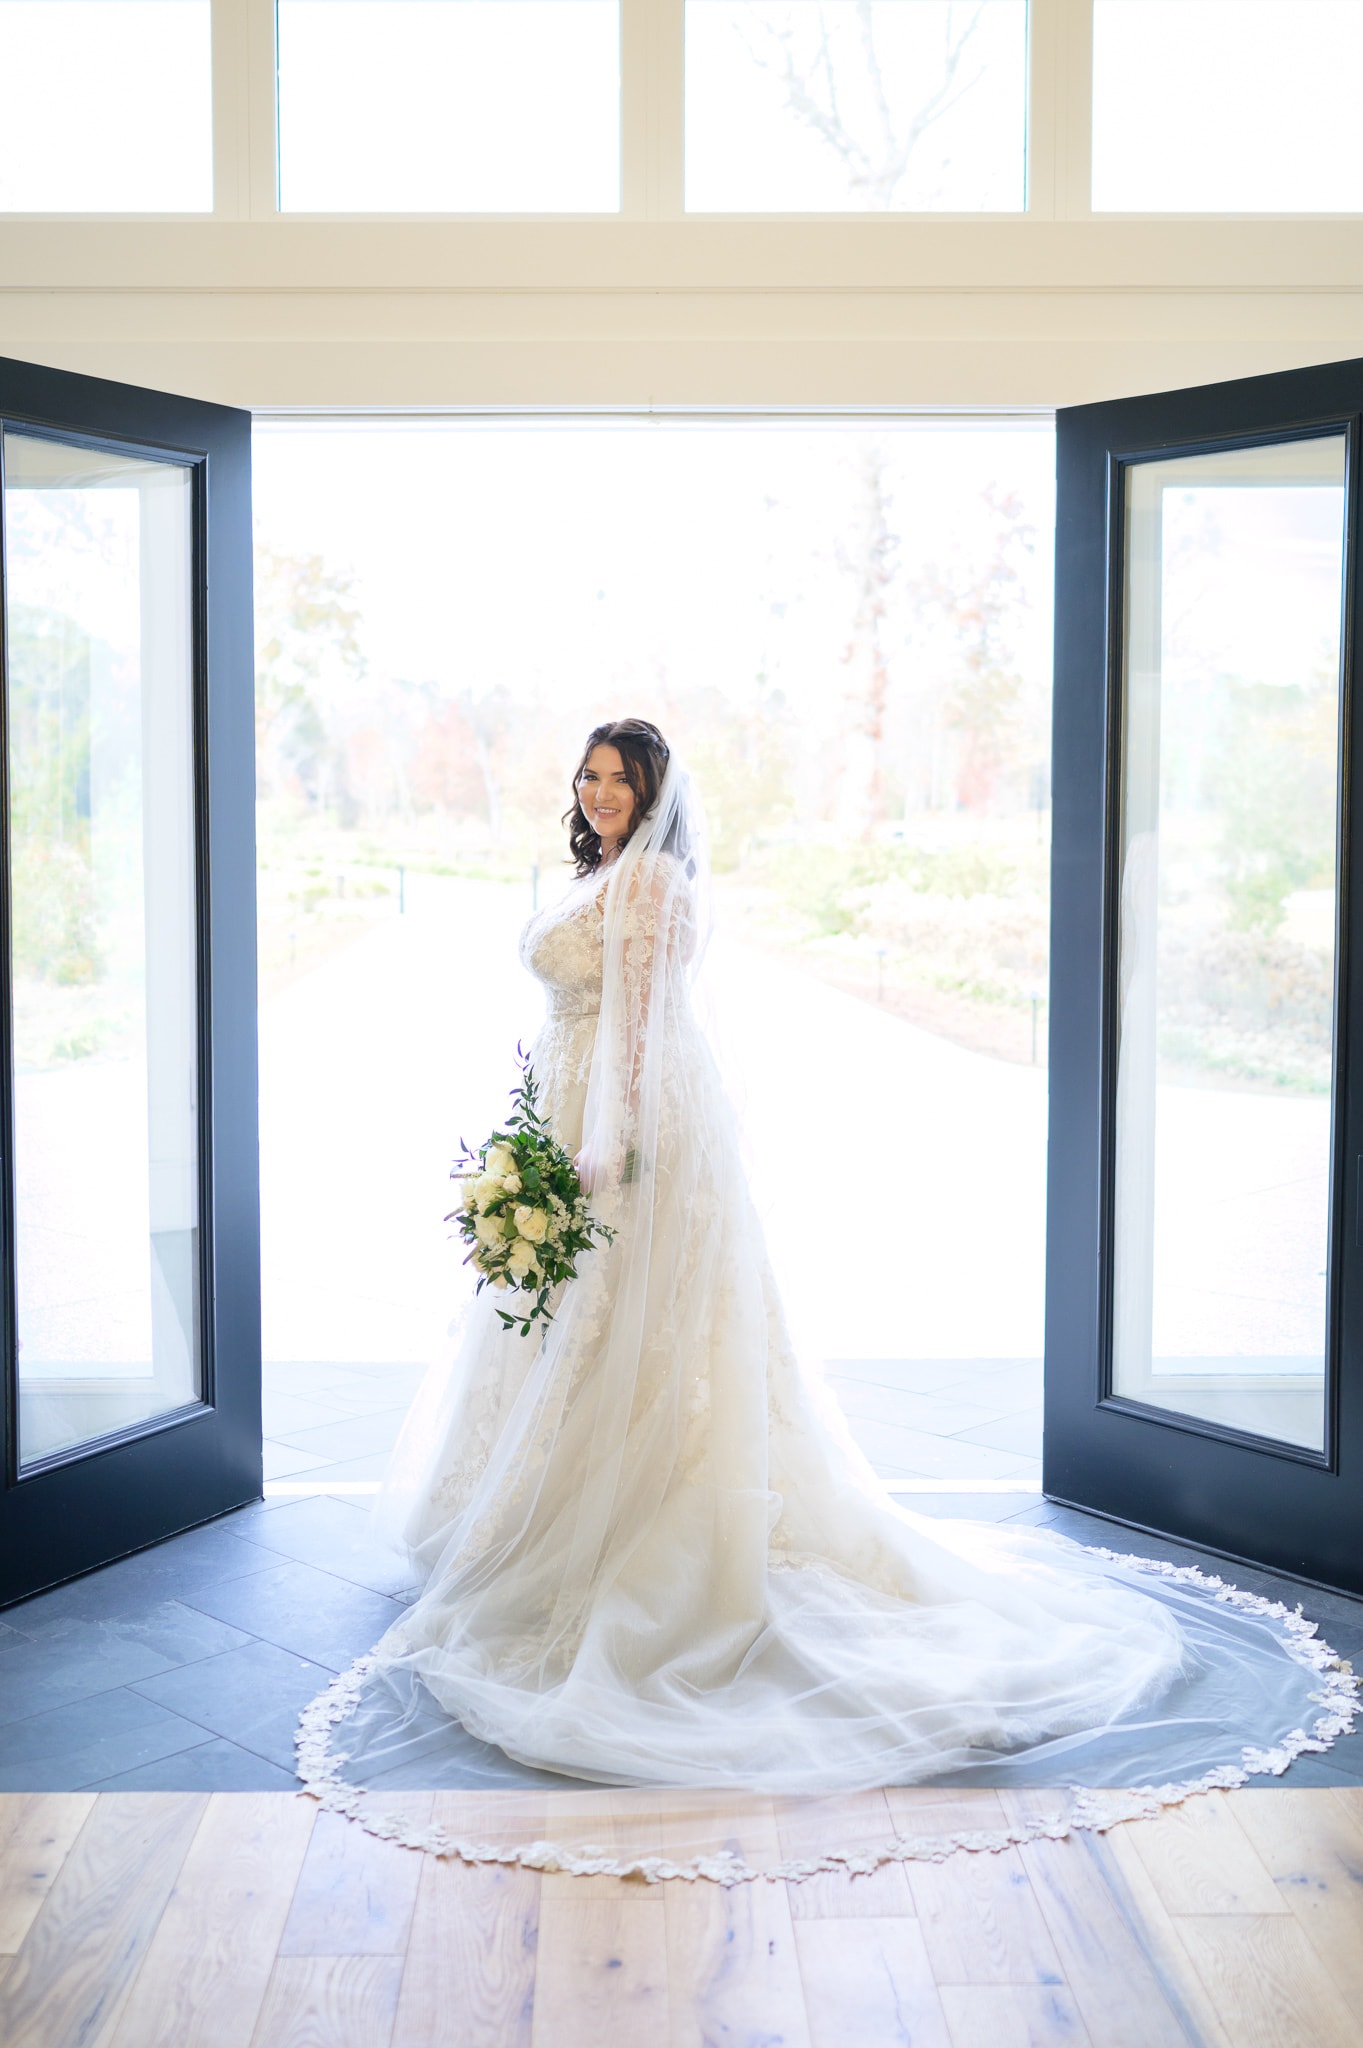 Bride standing in doorway - The Venue at White Oaks Farm